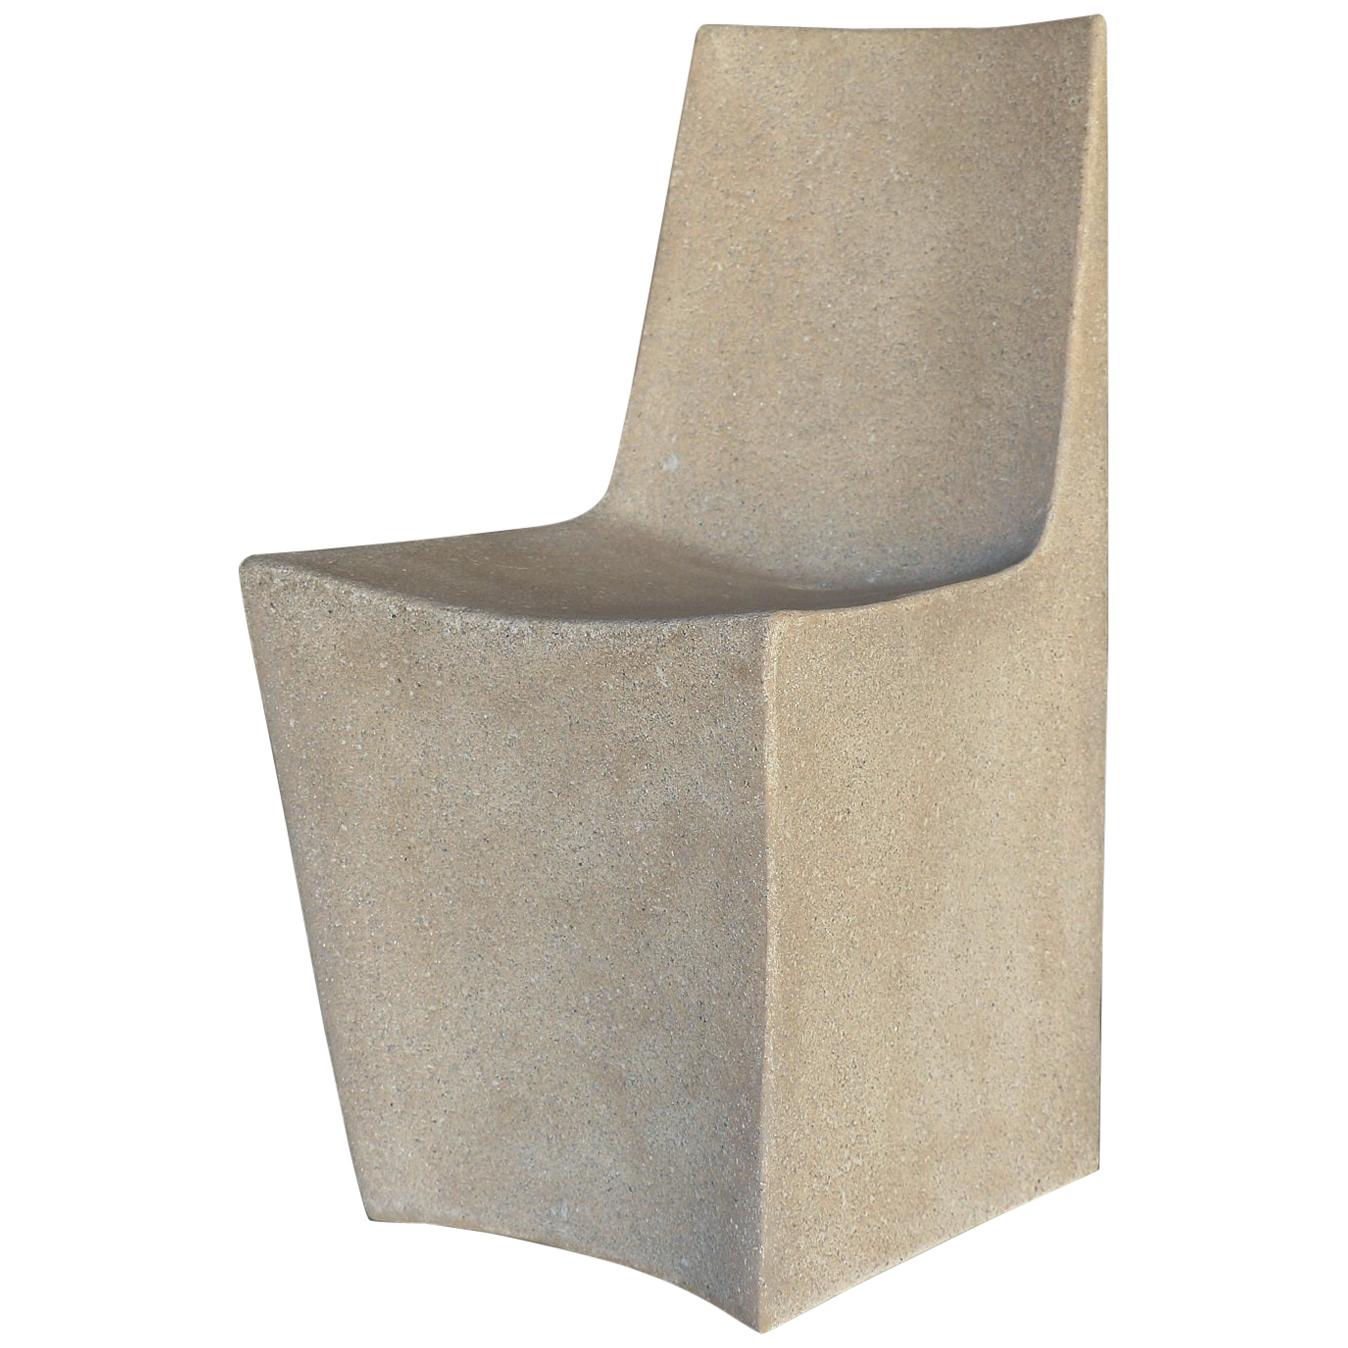 Cast Resin 'Stone' Dining Chair, Aged Stone Finish by Zachary A. Design